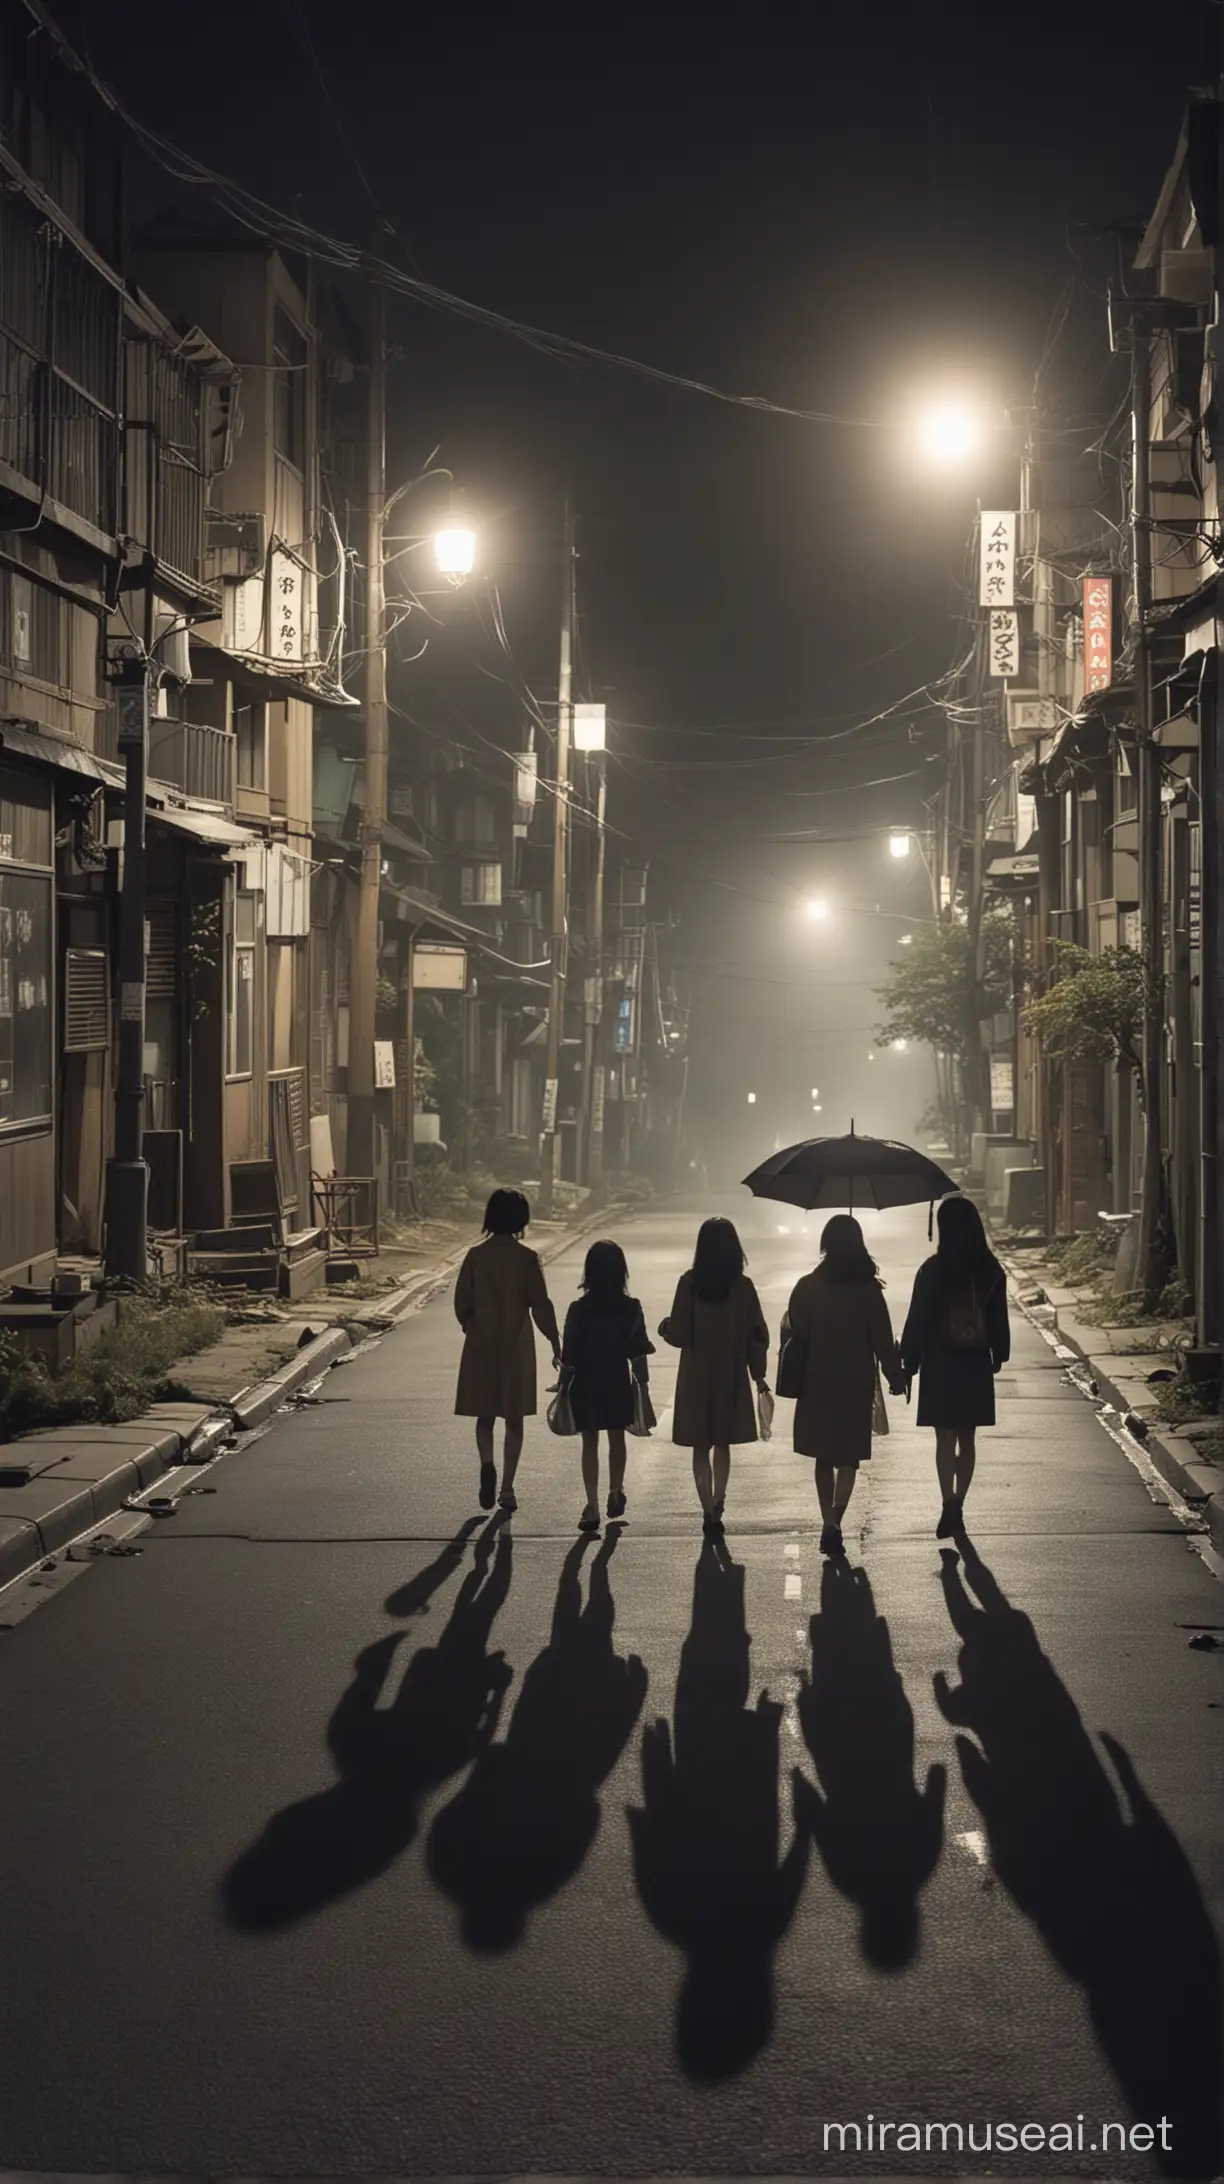 Japanese Students and Teacher Strolling on a 1970s Themed Spooky Street